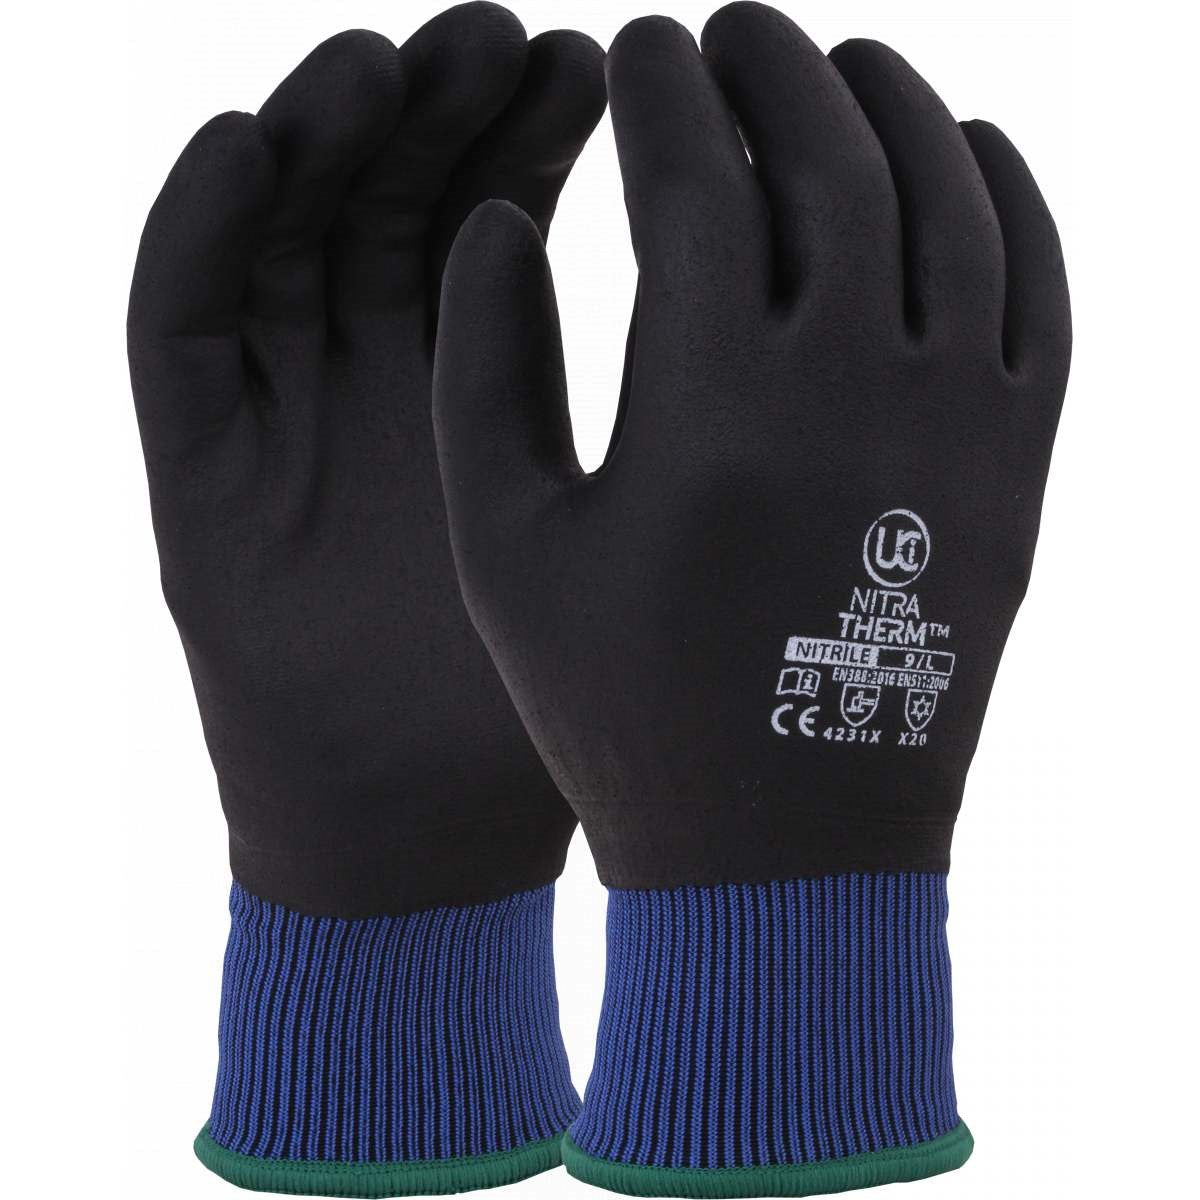 Ultimate Industrial NitraTherm Insulated Fully Coated Gloves, Black/Blue